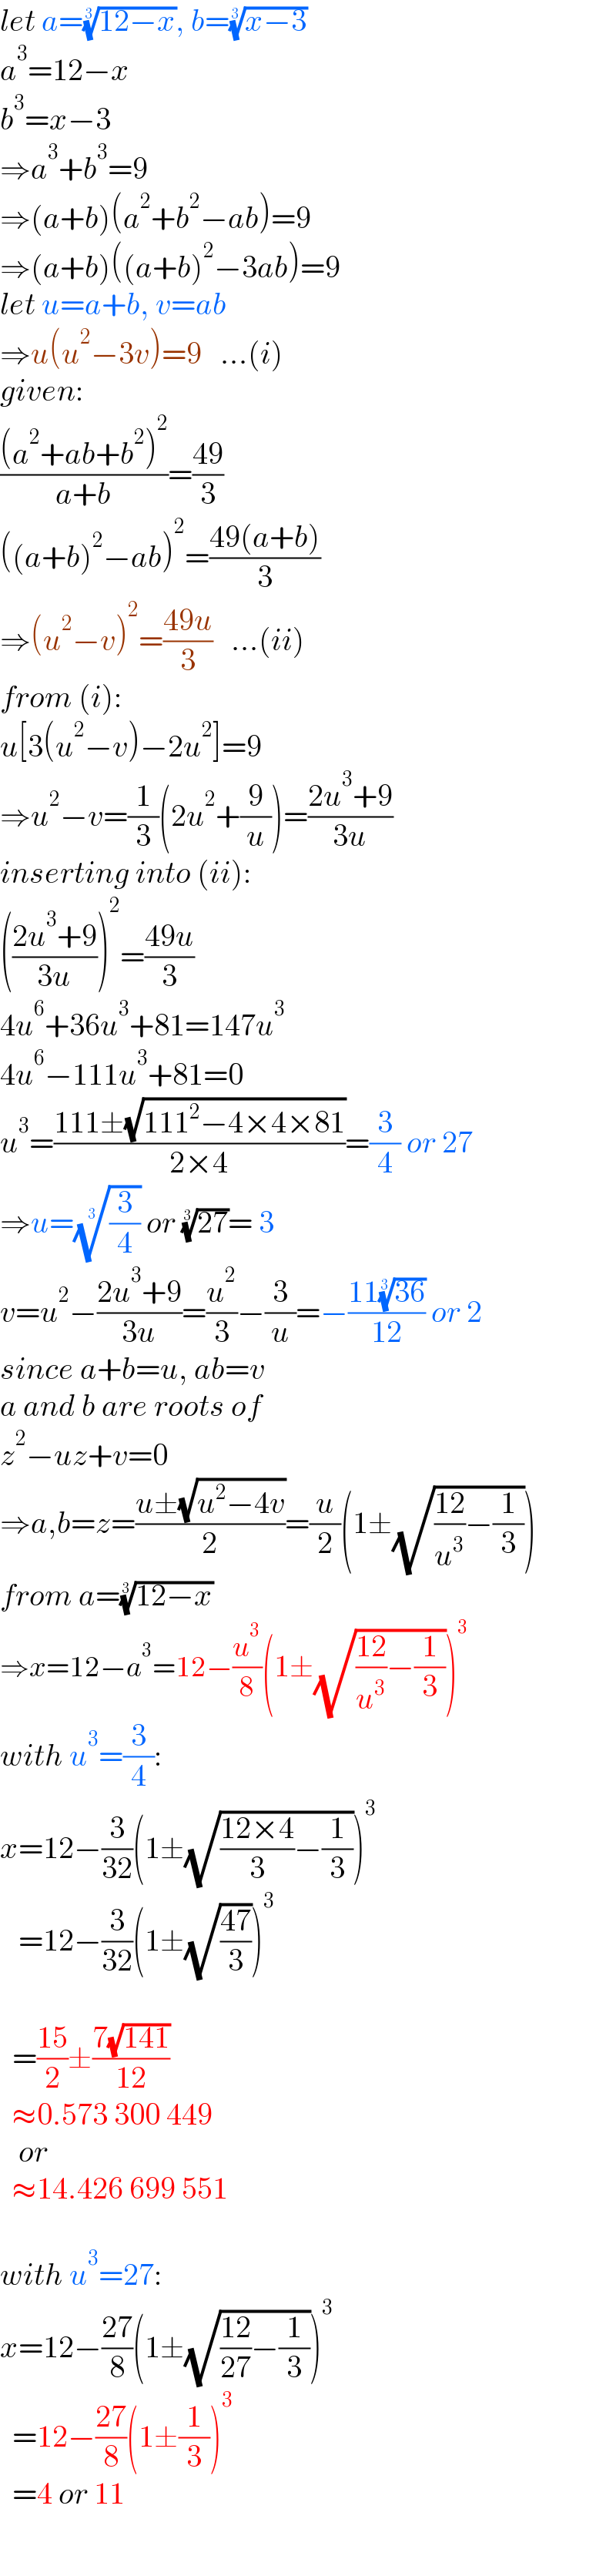 let a=((12−x))^(1/3) , b=((x−3))^(1/3)   a^3 =12−x  b^3 =x−3  ⇒a^3 +b^3 =9  ⇒(a+b)(a^2 +b^2 −ab)=9  ⇒(a+b)((a+b)^2 −3ab)=9  let u=a+b, v=ab  ⇒u(u^2 −3v)=9   ...(i)  given:  (((a^2 +ab+b^2 )^2 )/(a+b))=((49)/3)  ((a+b)^2 −ab)^2 =((49(a+b))/3)  ⇒(u^2 −v)^2 =((49u)/3)   ...(ii)  from (i):  u[3(u^2 −v)−2u^2 ]=9  ⇒u^2 −v=(1/3)(2u^2 +(9/u))=((2u^3 +9)/(3u))  inserting into (ii):  (((2u^3 +9)/(3u)))^2 =((49u)/3)  4u^6 +36u^3 +81=147u^3   4u^6 −111u^3 +81=0  u^3 =((111±(√(111^2 −4×4×81)))/(2×4))=(3/4) or 27  ⇒u=((3/4))^(1/3)  or ((27))^(1/3) = 3  v=u^2 −((2u^3 +9)/(3u))=(u^2 /3)−(3/u)=−((11((36))^(1/3) )/(12)) or 2  since a+b=u, ab=v  a and b are roots of  z^2 −uz+v=0  ⇒a,b=z=((u±(√(u^2 −4v)))/2)=(u/2)(1±(√(((12)/u^3 )−(1/3))))  from a=((12−x))^(1/3)   ⇒x=12−a^3 =12−(u^3 /8)(1±(√(((12)/u^3 )−(1/3))))^3   with u^3 =(3/4):  x=12−(3/(32))(1±(√(((12×4)/3)−(1/3))))^3      =12−(3/(32))(1±(√((47)/3)))^3        =((15)/2)±((7(√(141)))/(12))    ≈0.573 300 449     or    ≈14.426 699 551    with u^3 =27:  x=12−((27)/8)(1±(√(((12)/(27))−(1/3))))^3     =12−((27)/8)(1±(1/3))^3     =4 or 11  